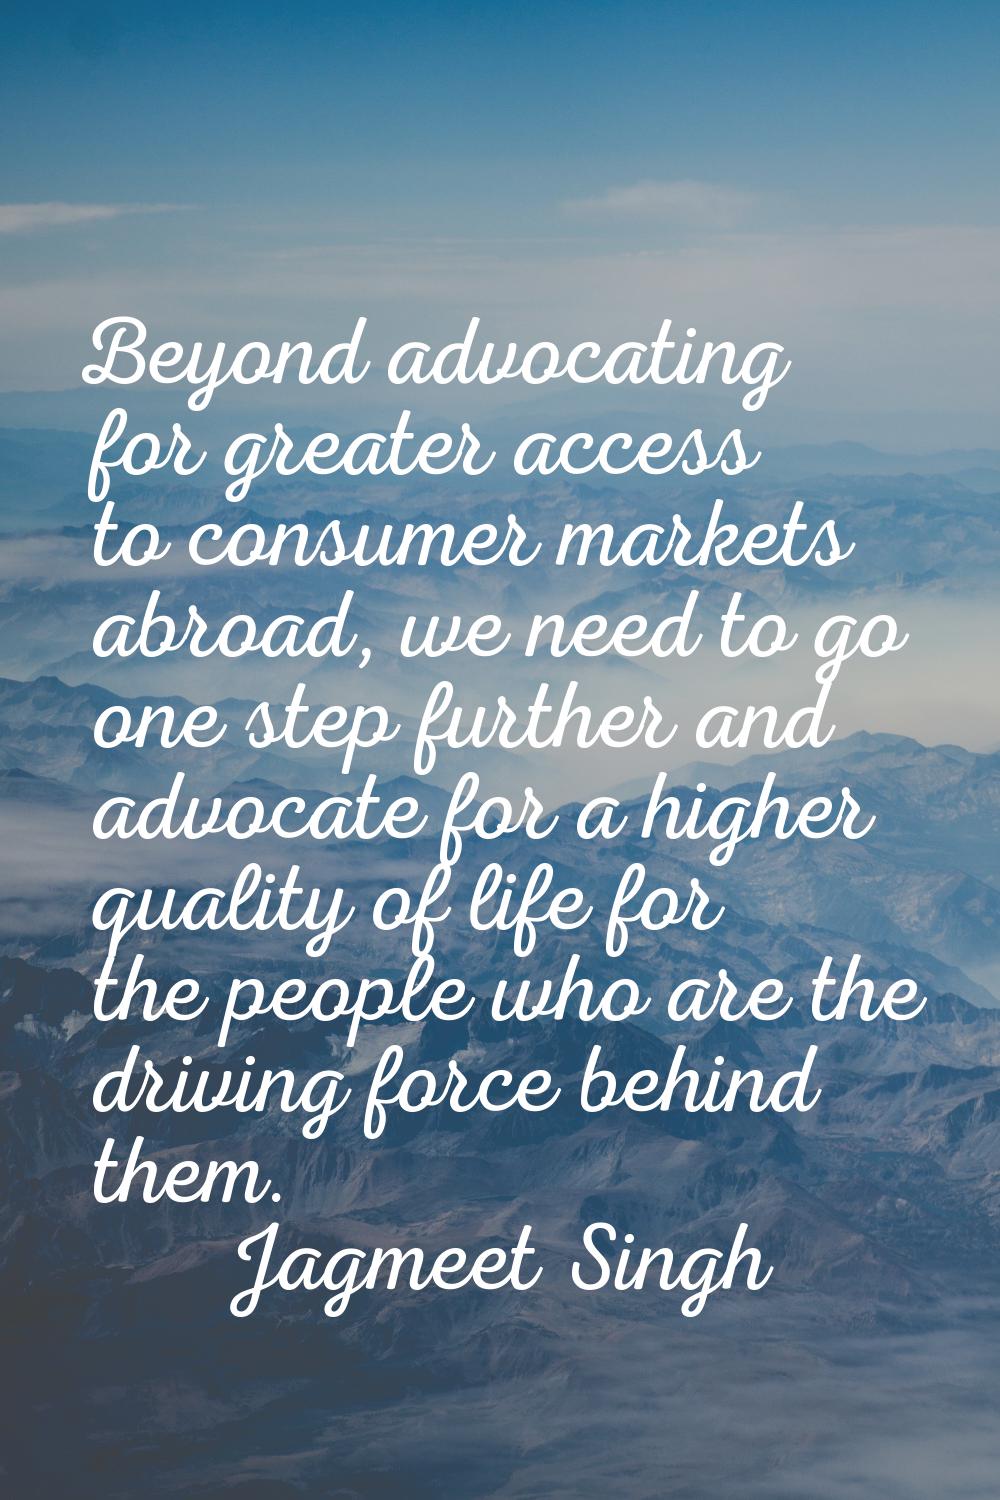 Beyond advocating for greater access to consumer markets abroad, we need to go one step further and